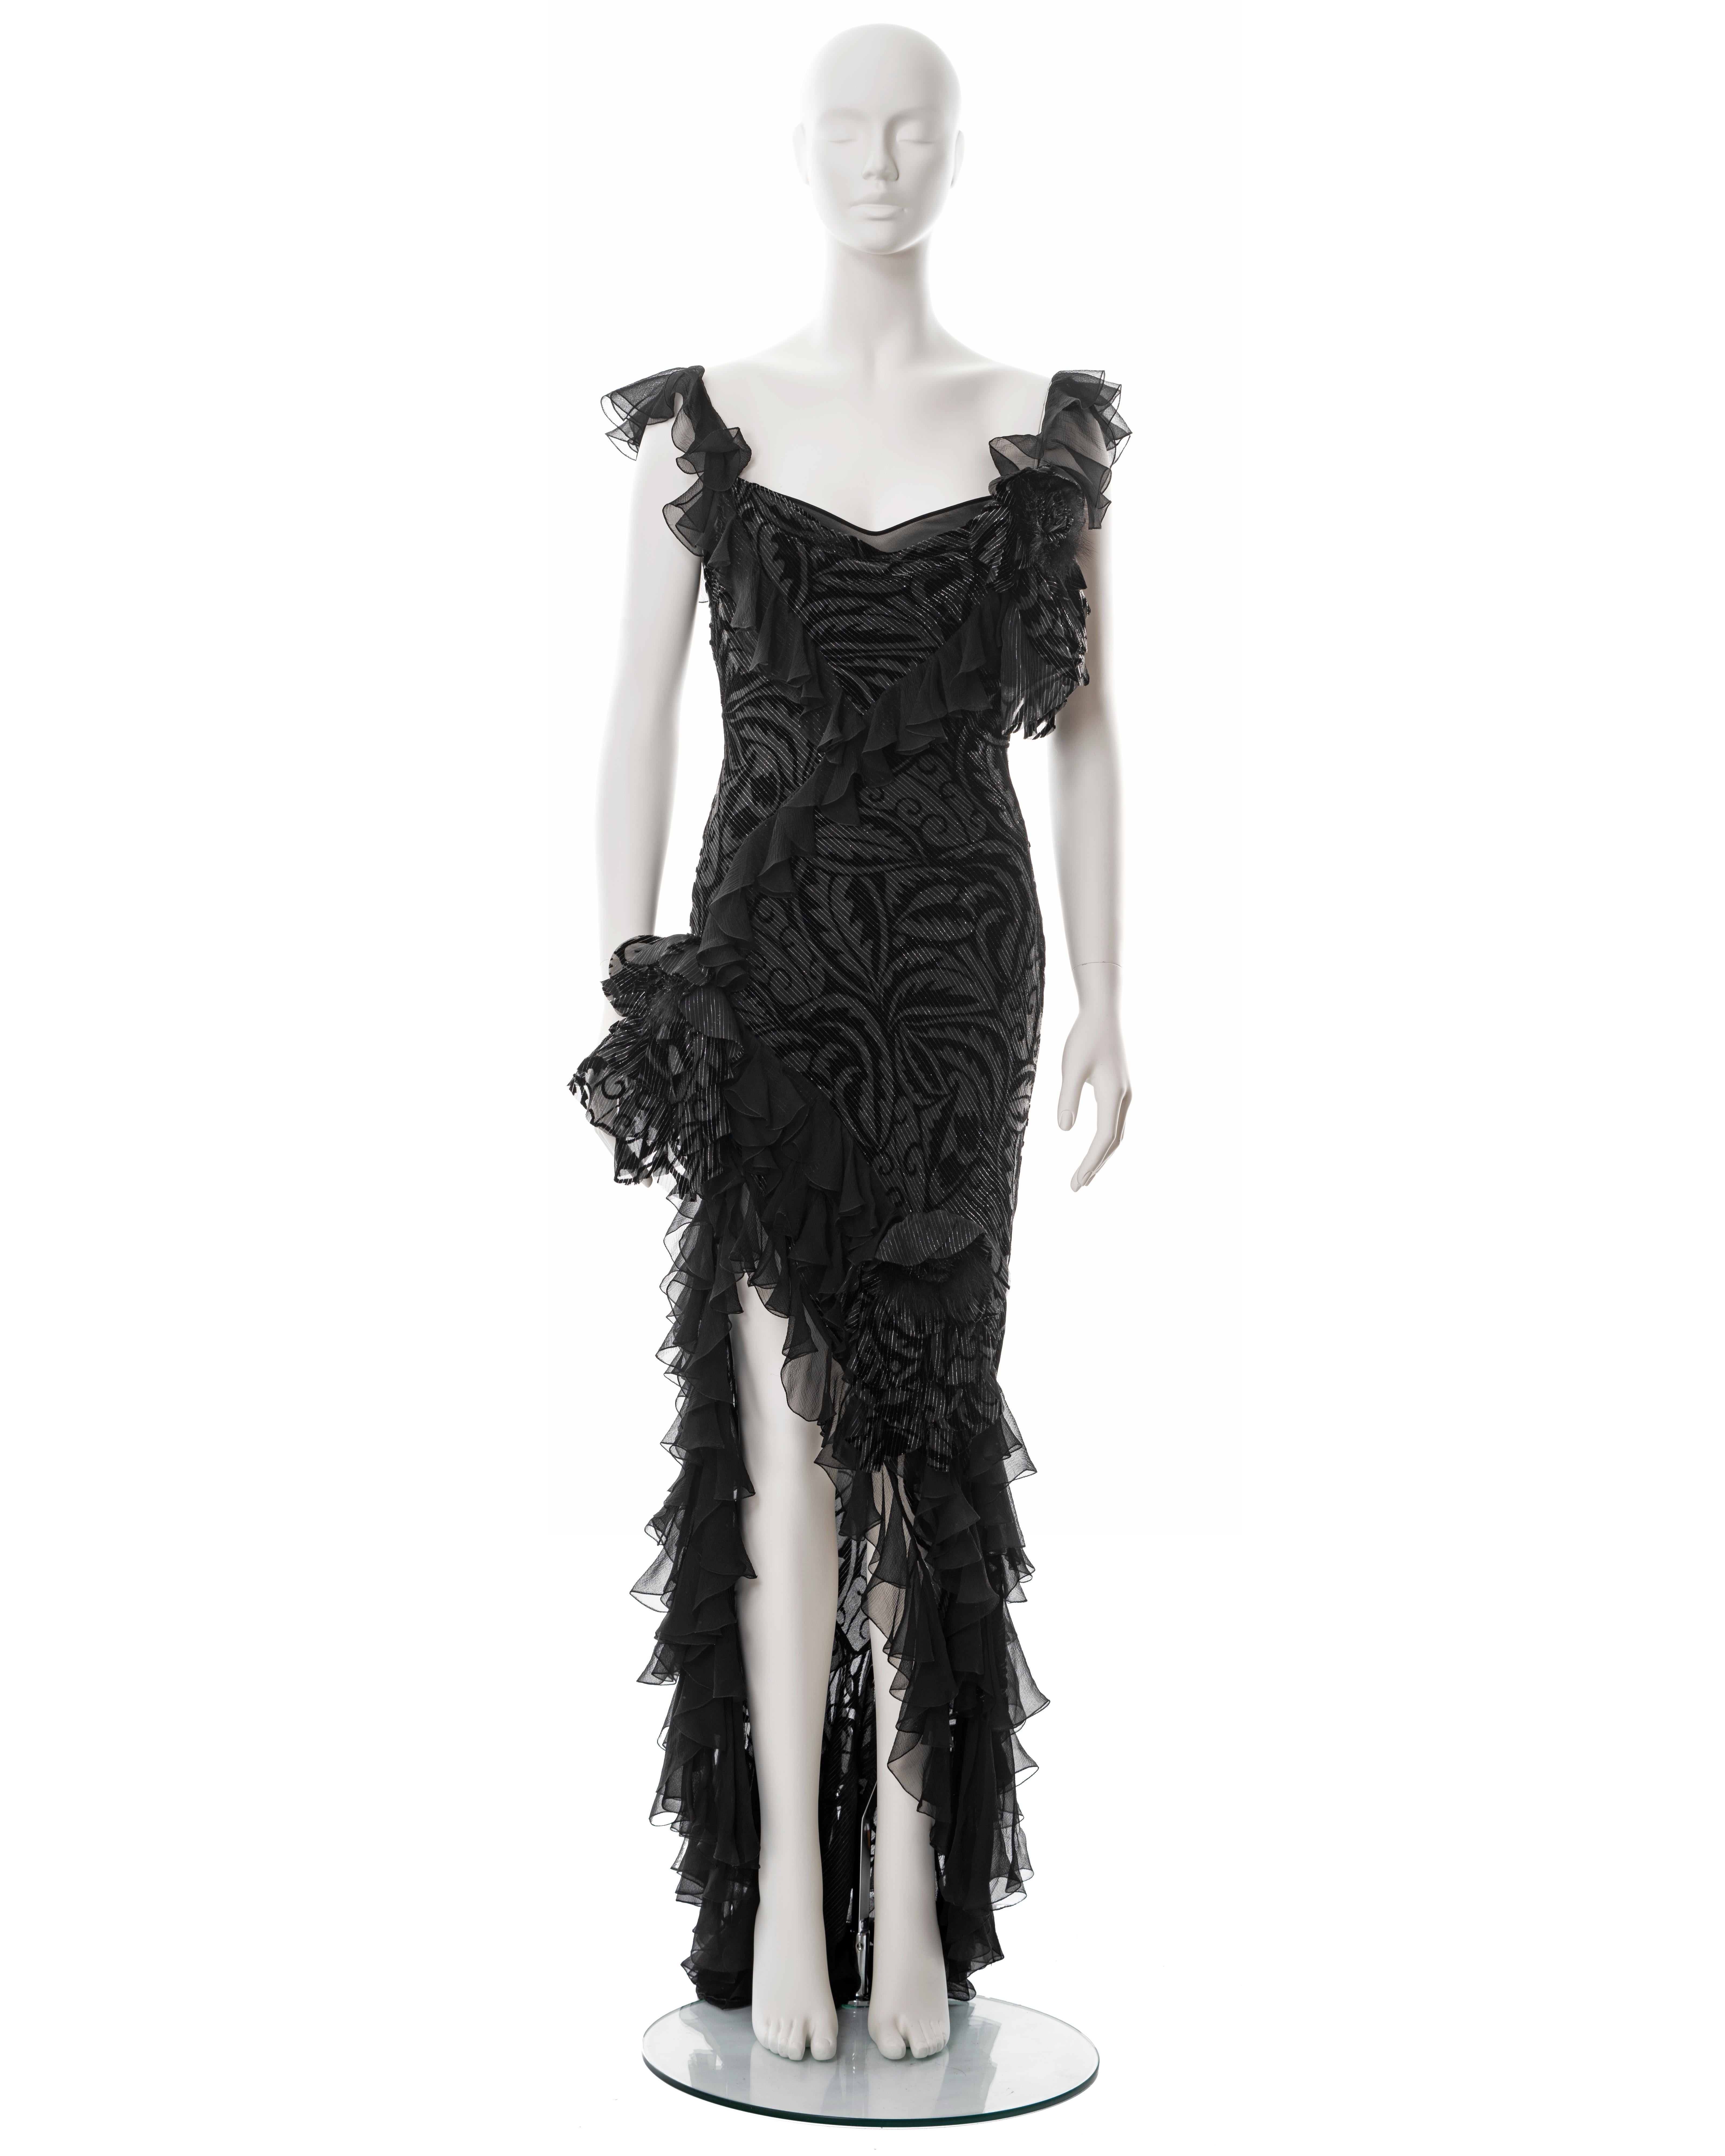 ▪ John Galliano evening dress
▪ Sold by One of a Kind Archive
▪ Fall-Winter 2003
▪ Constructed from bias-cut metallic black and silver viscose-silk chiffon
▪ Ruffled high-low skirt and trim 
▪ Chiffon and fur corsages 
▪ FR 40 - UK 12 - US 6
▪ Made